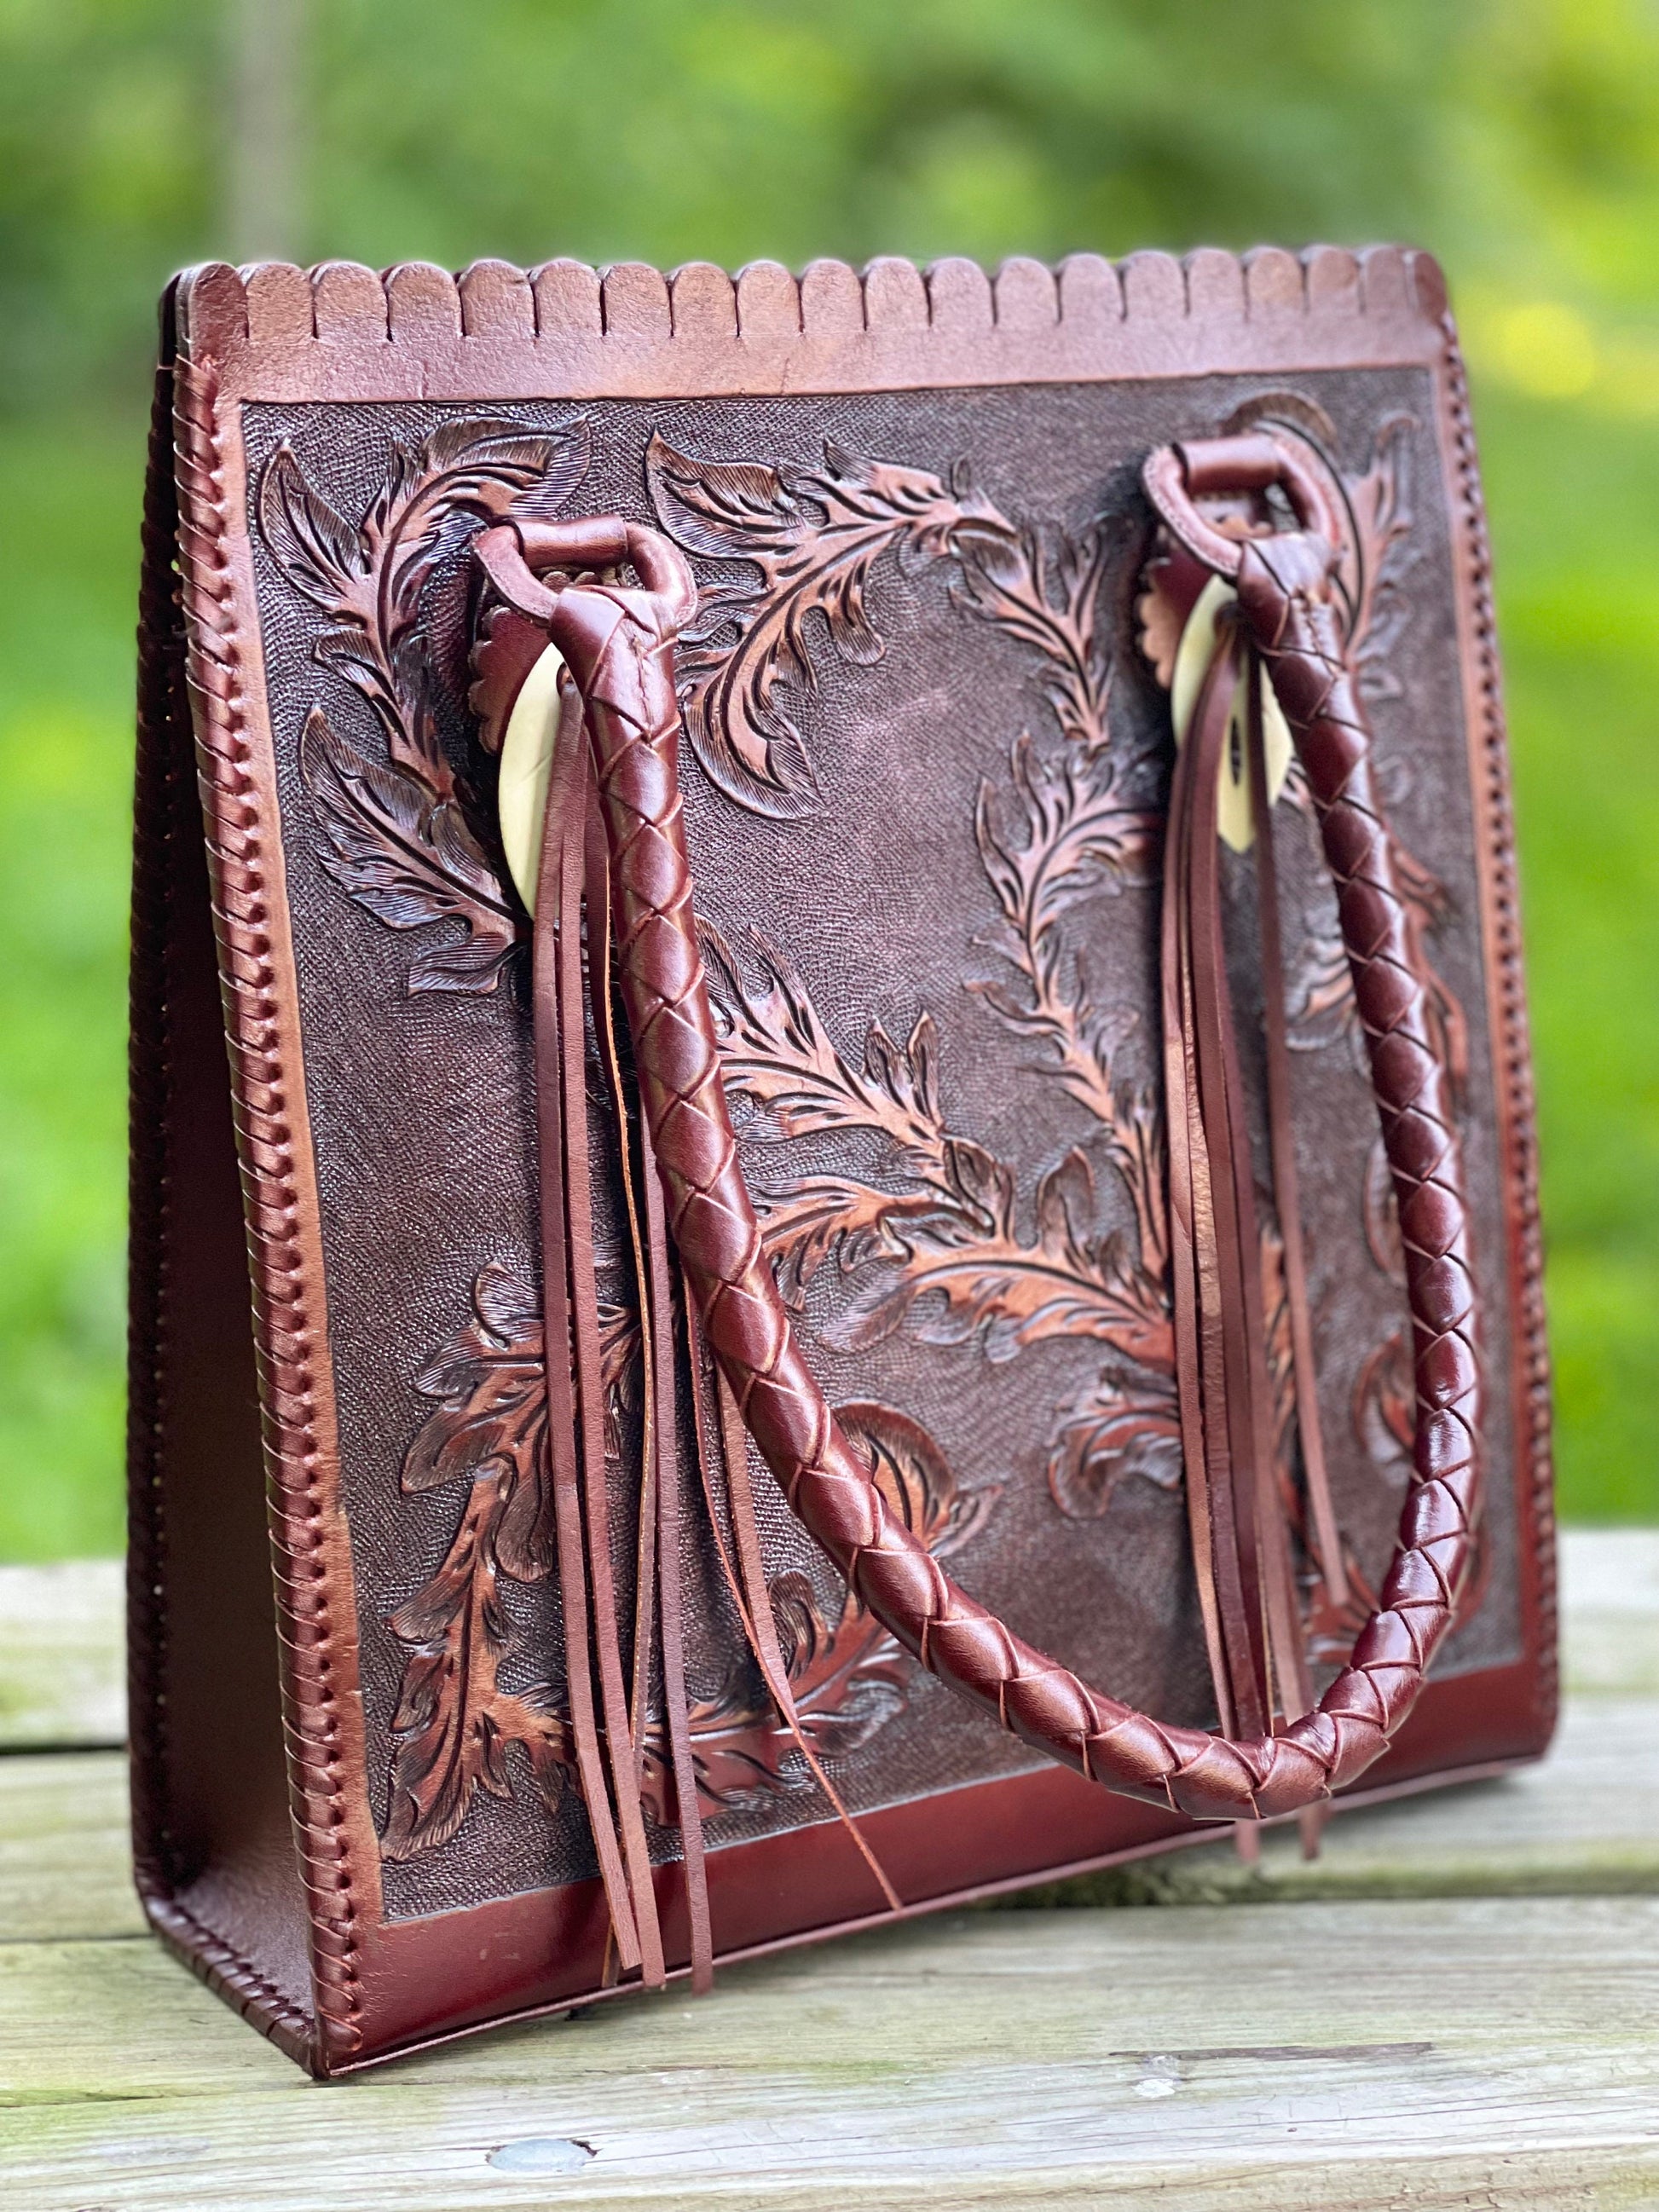 Hand-Tooled Leather Hobo Bag, "CORREAS SPIGAS" by ALLE - ALLE Handbags